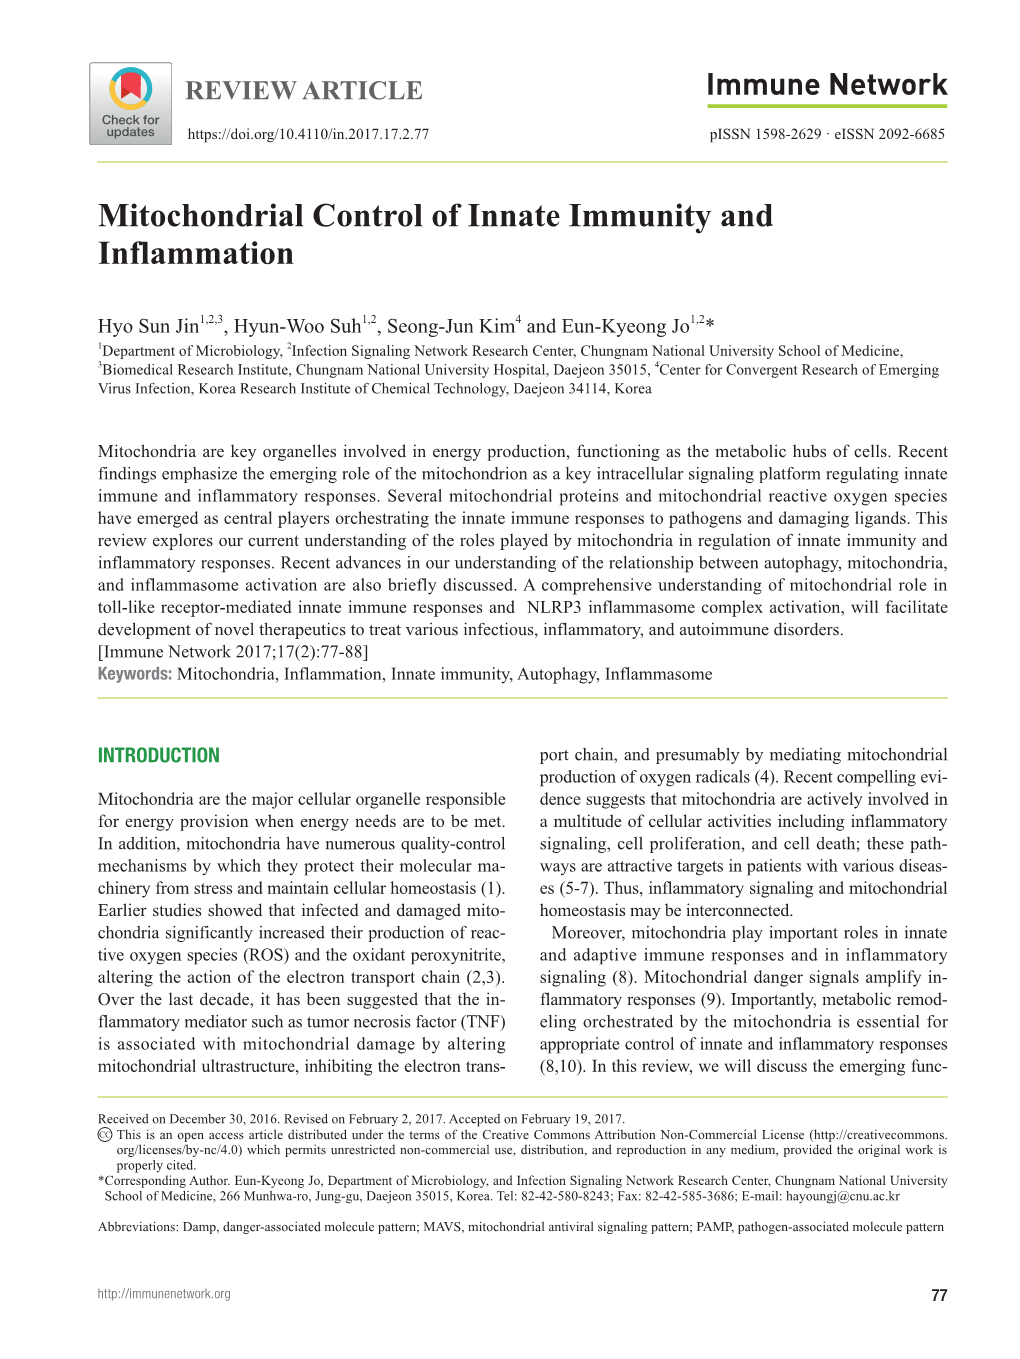 Mitochondrial Control of Innate Immunity and Inflammation